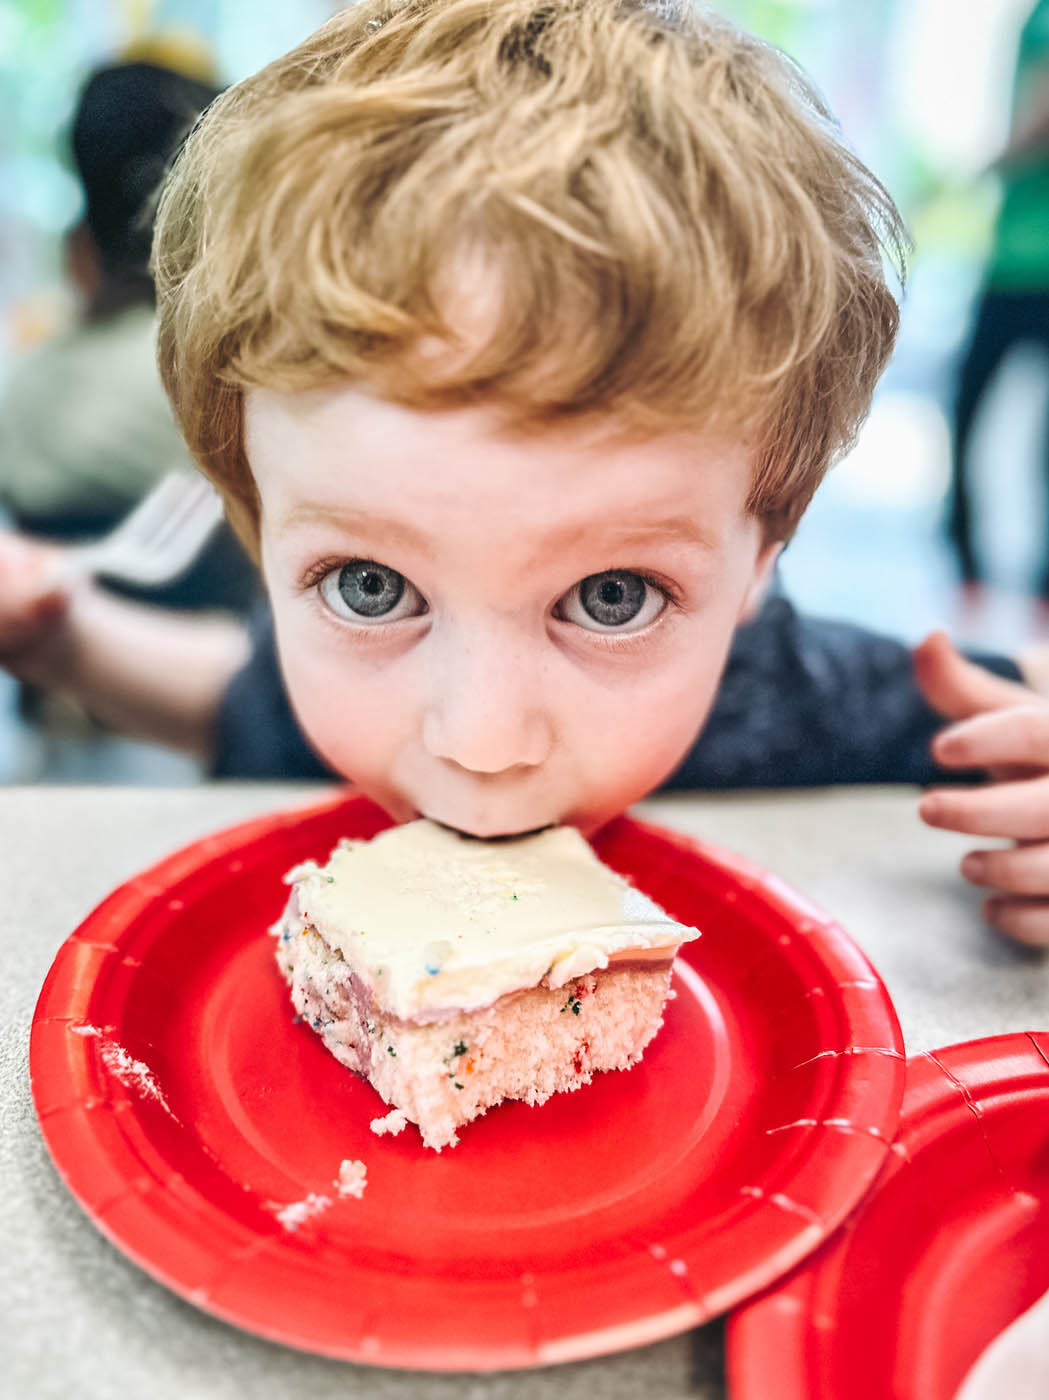 A kid taking a big bite out of a cake piece at Romp n' Roll - a children's party place in Pittsburgh, PA.